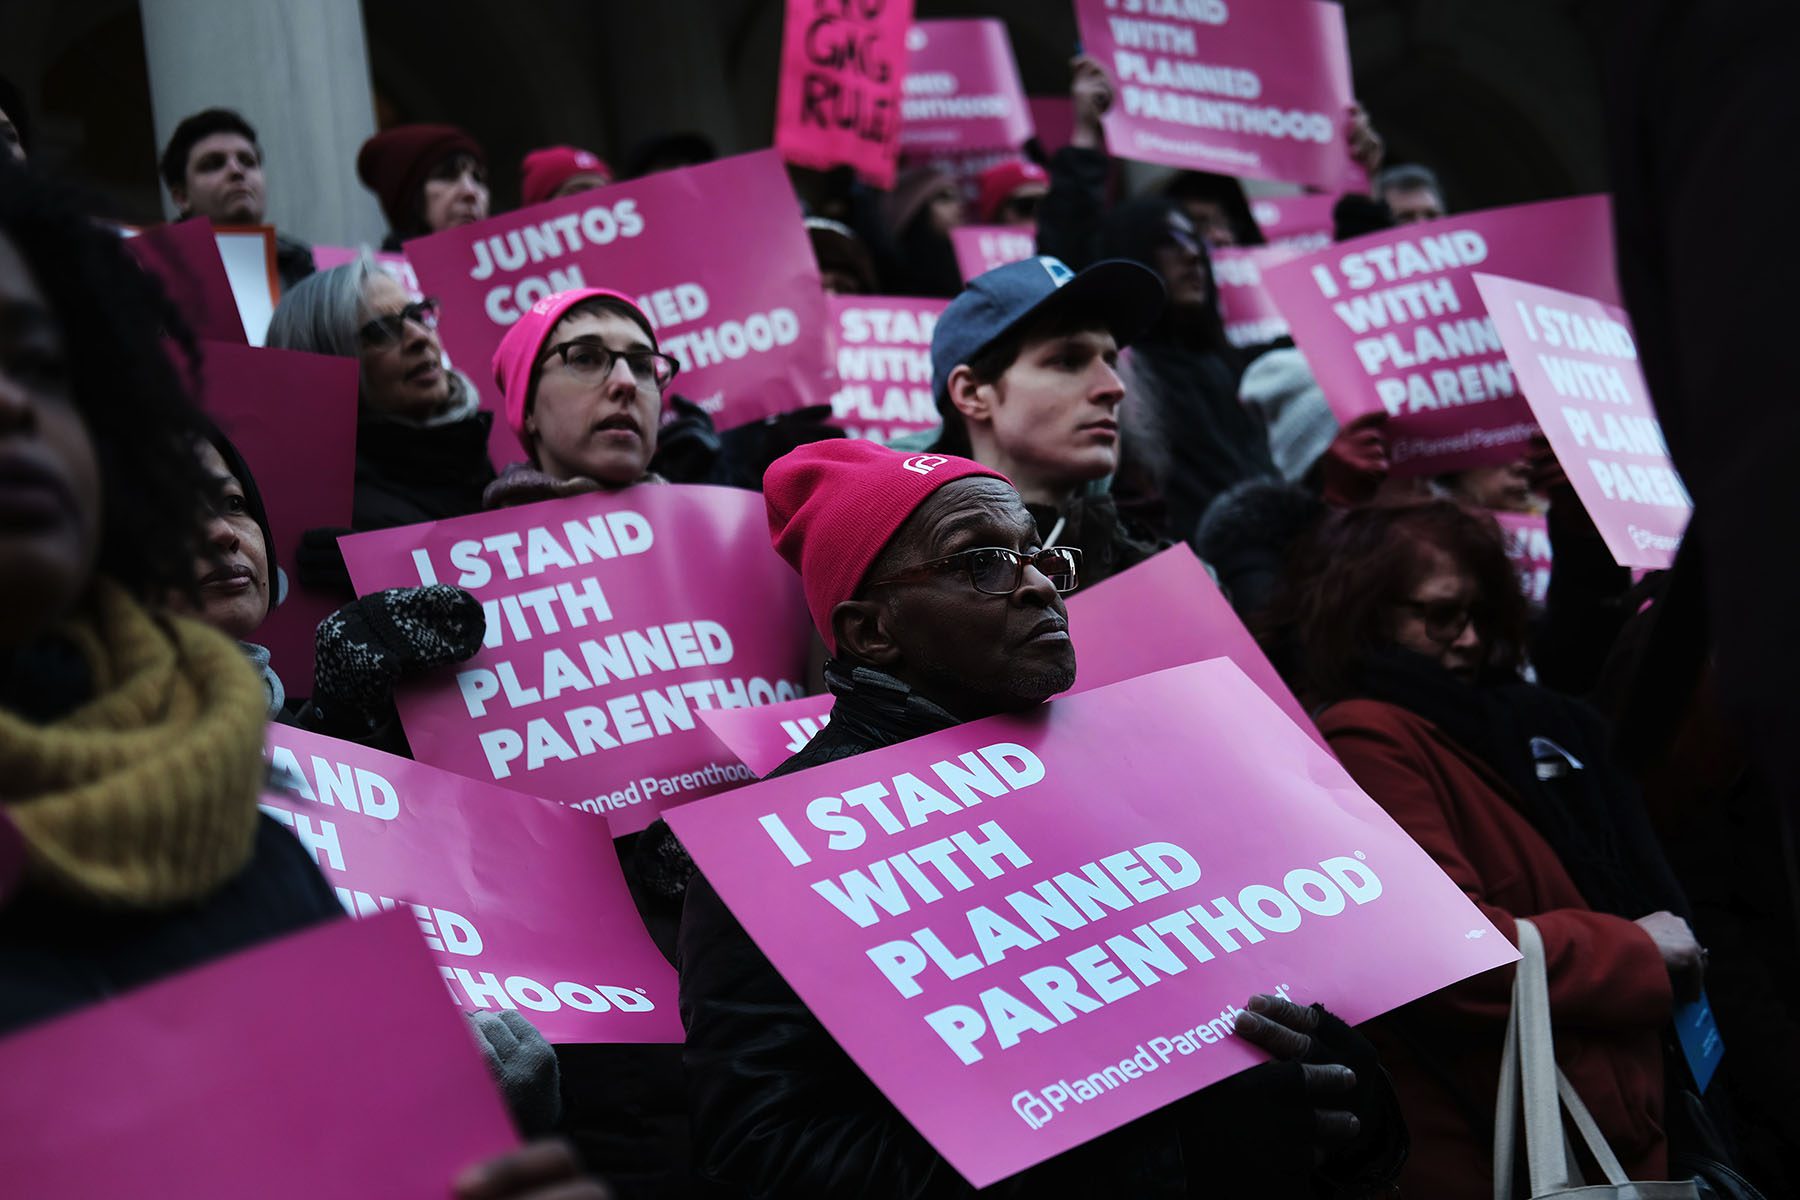 A diverse crowd of people hold signs that read "I Stand With Planned Parenthood"